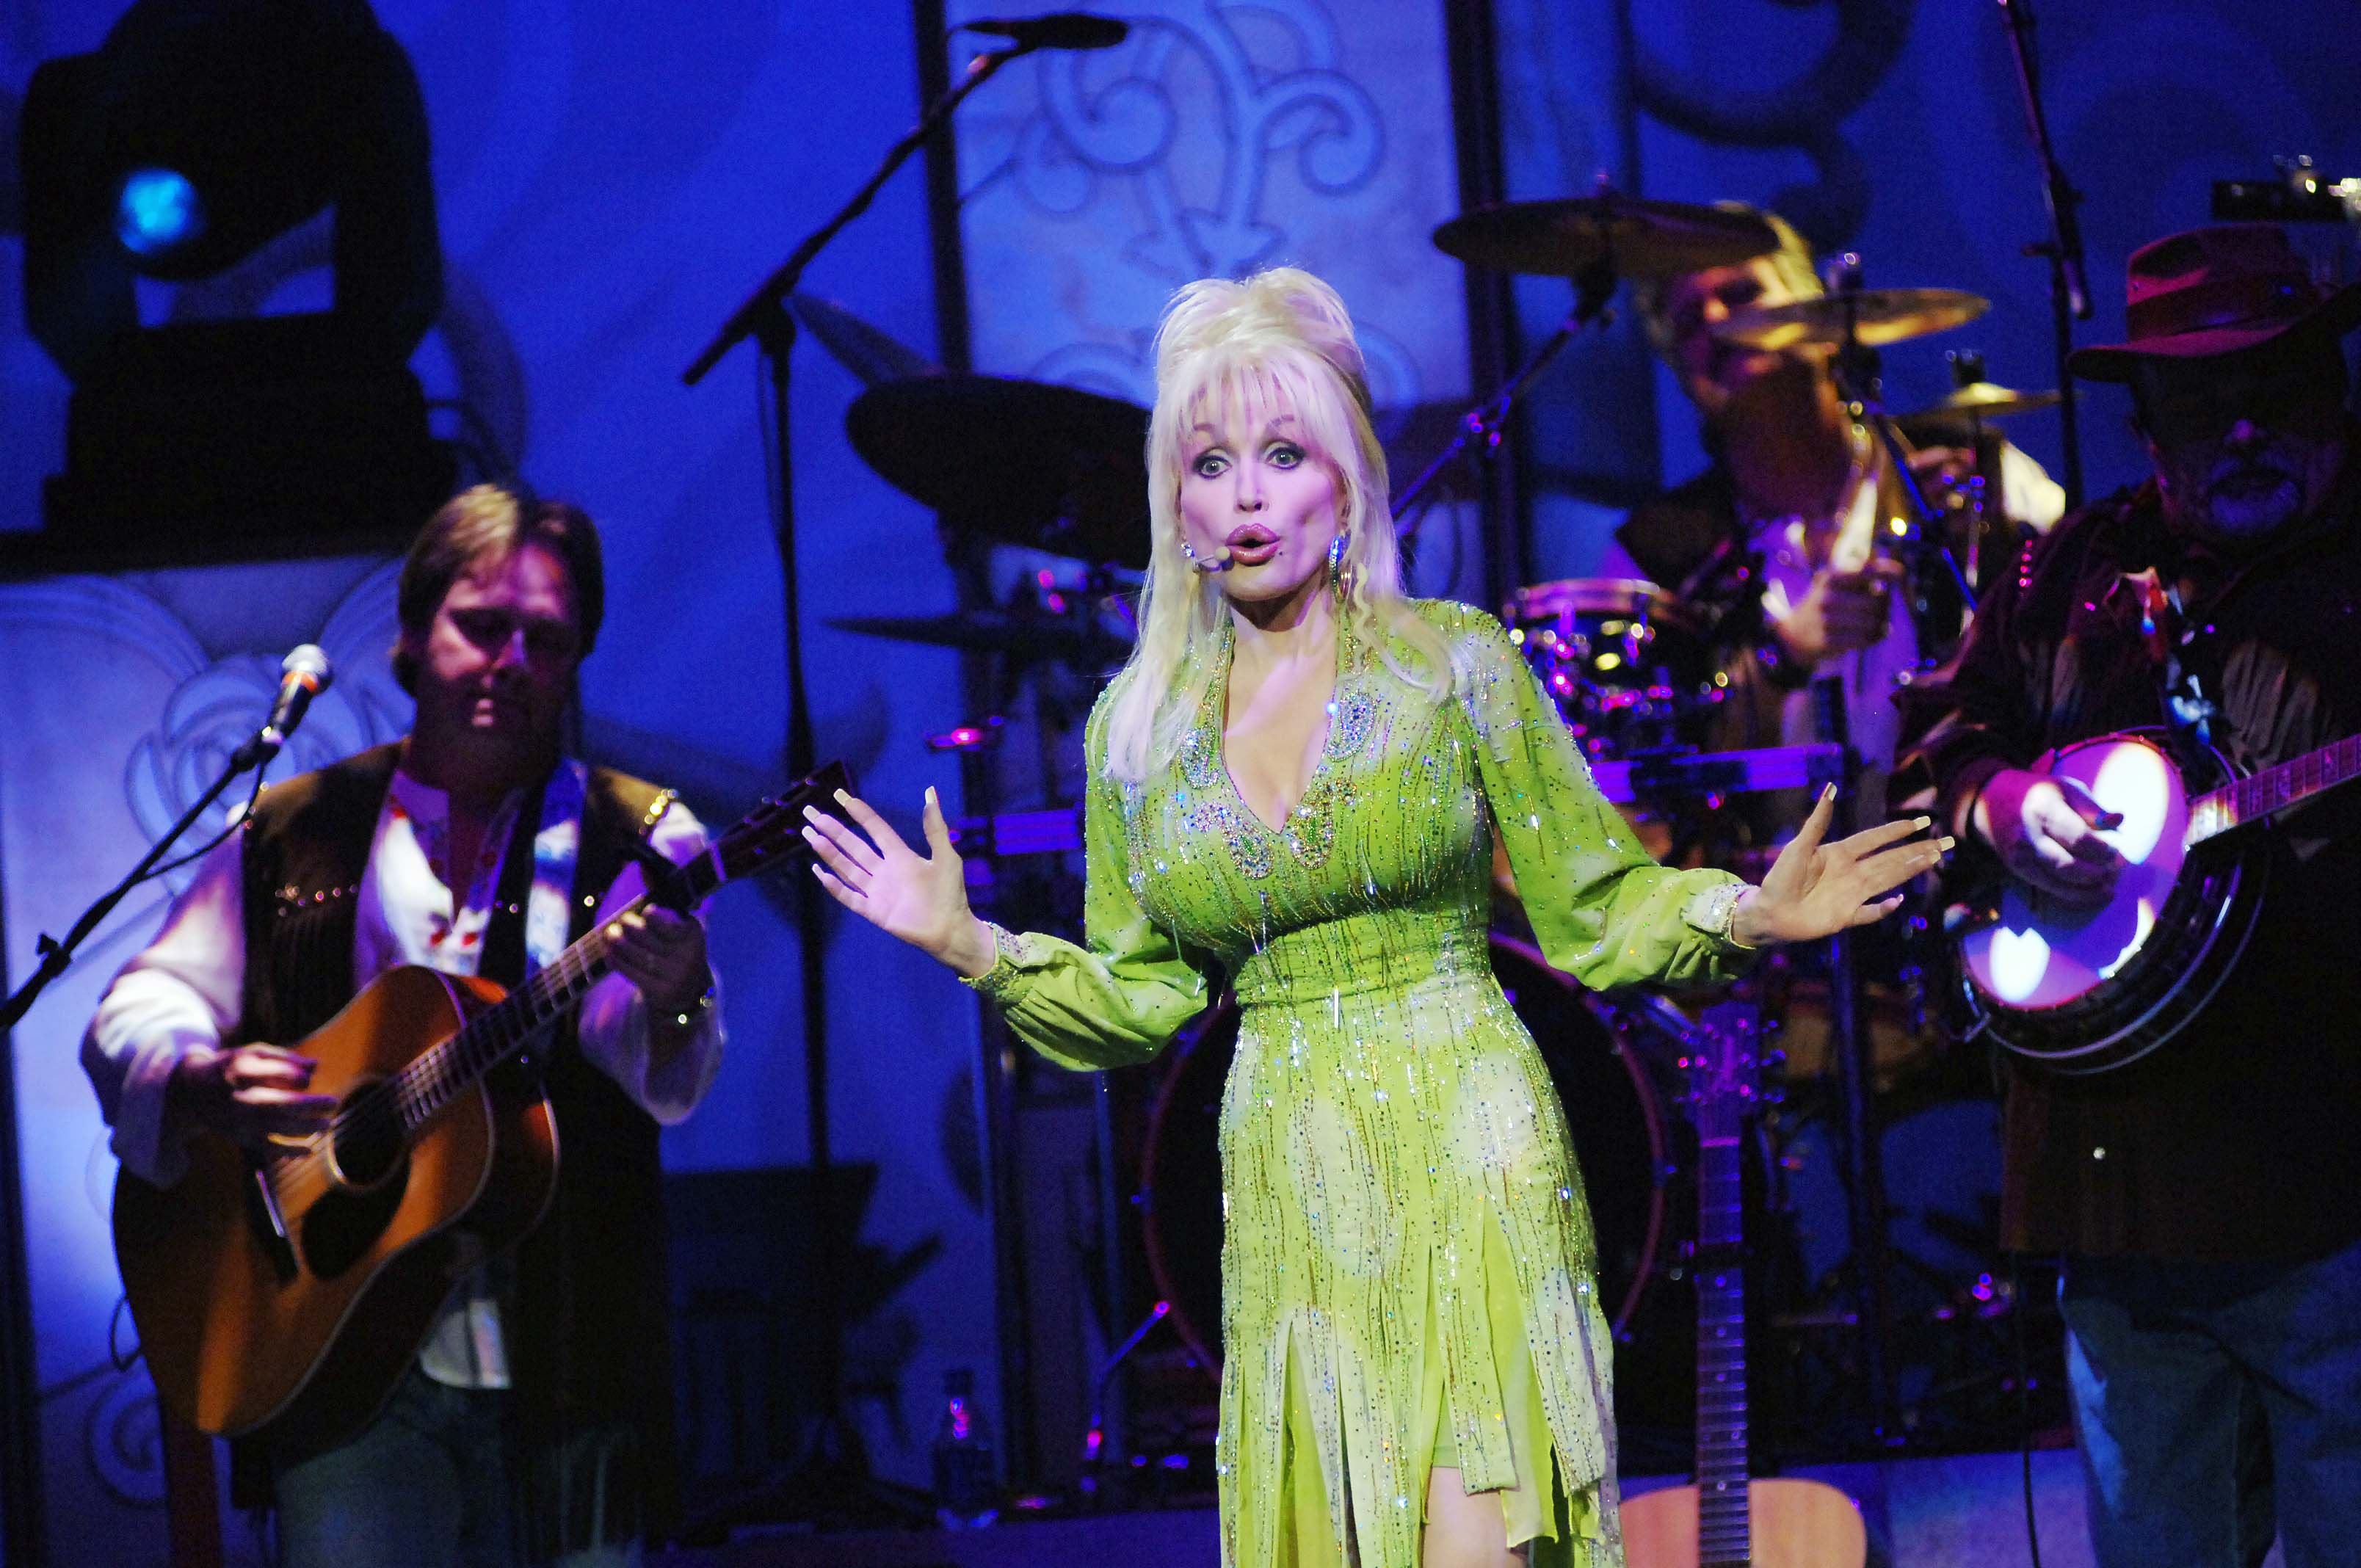 Dolly Parton performs on stage in a lime green dress.